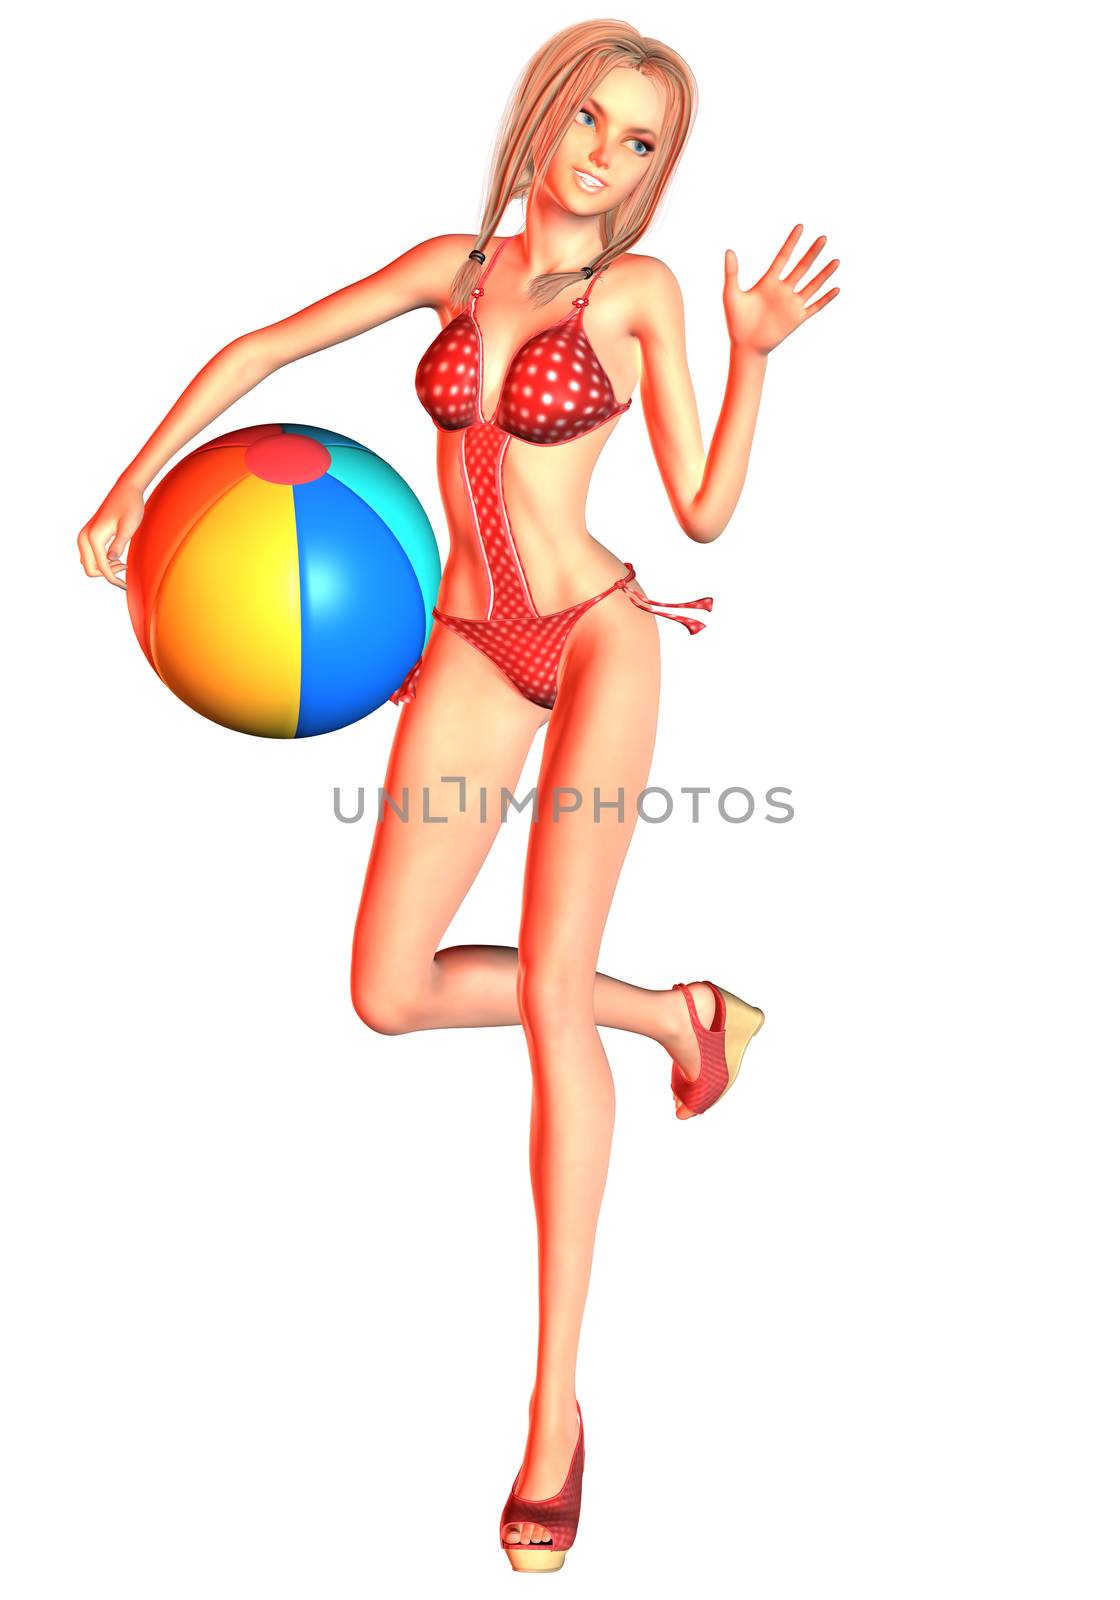 Digital 3D Illustration of a Toon Girl; Cutout on white Background